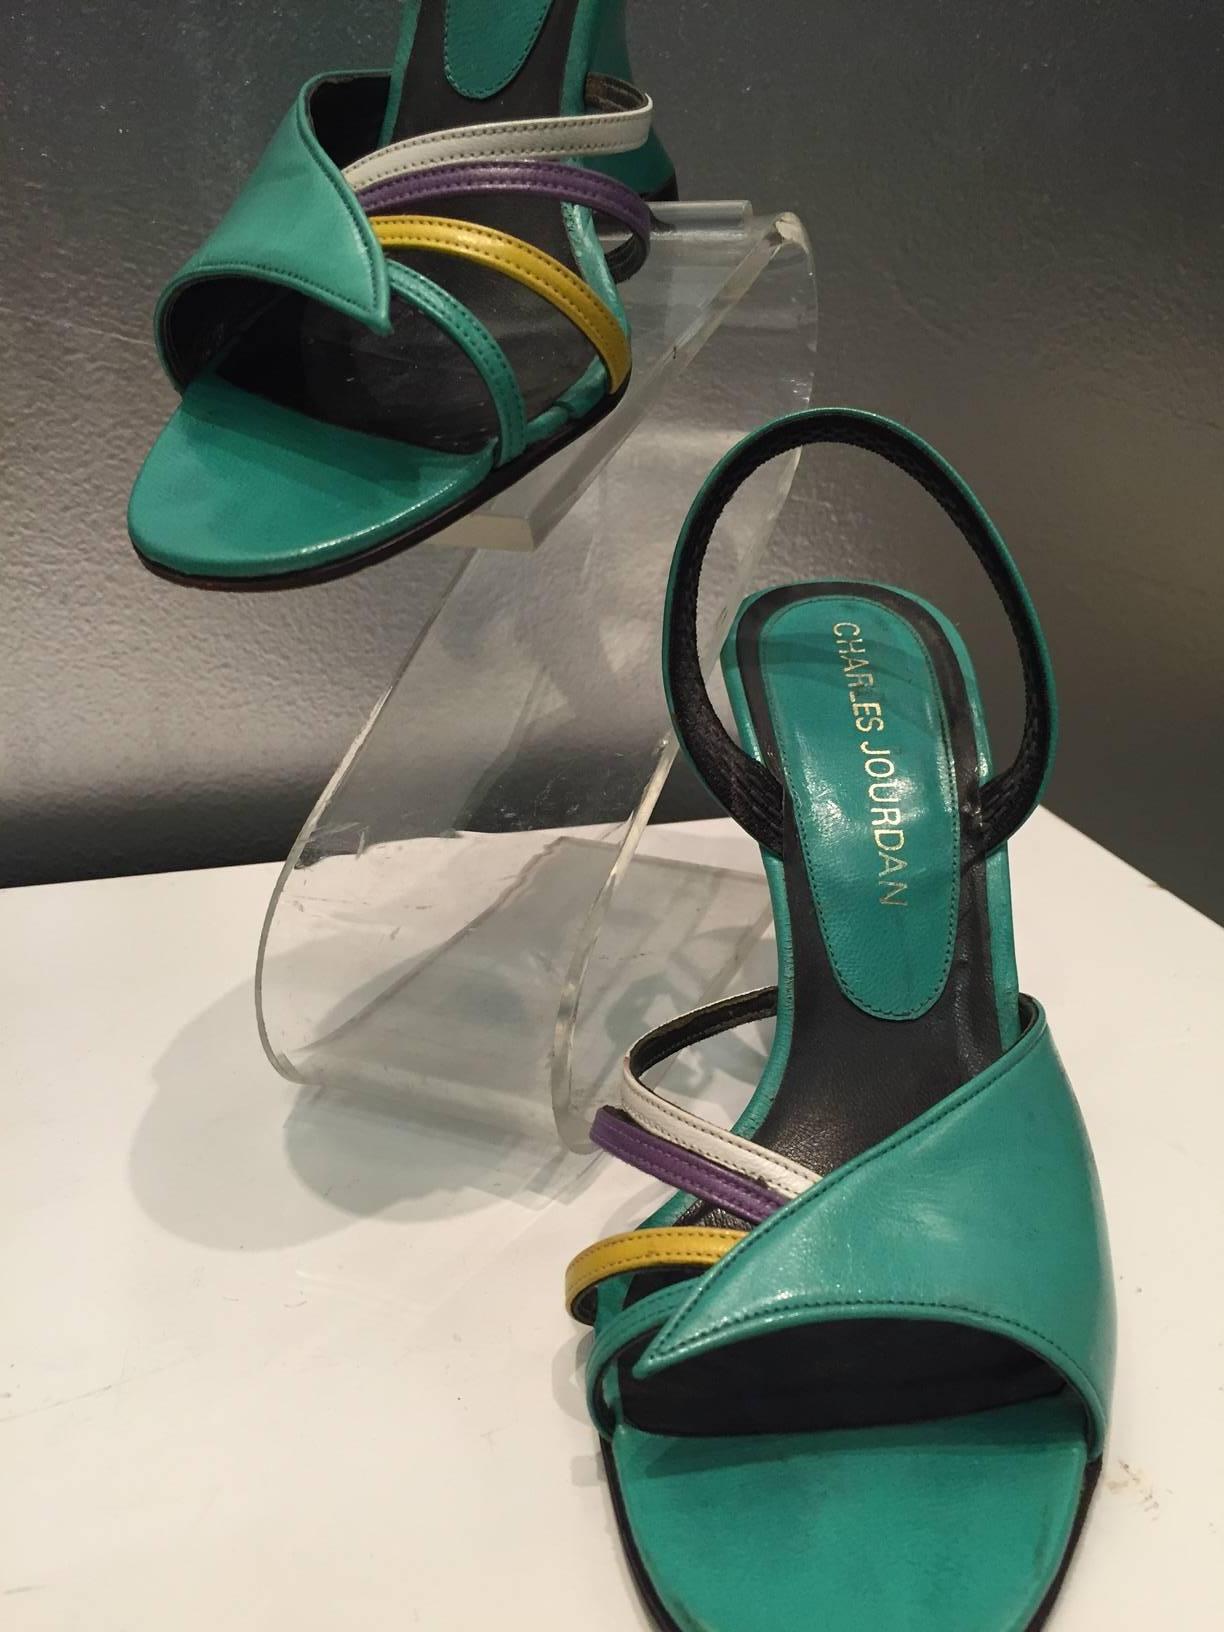 1980s Charles Jourdan turquoise slingback, open-toe sandal with white, lavender, and gold side straps and Ferragamo 1940s inspired cut-in wedge heel.  Size 5 B